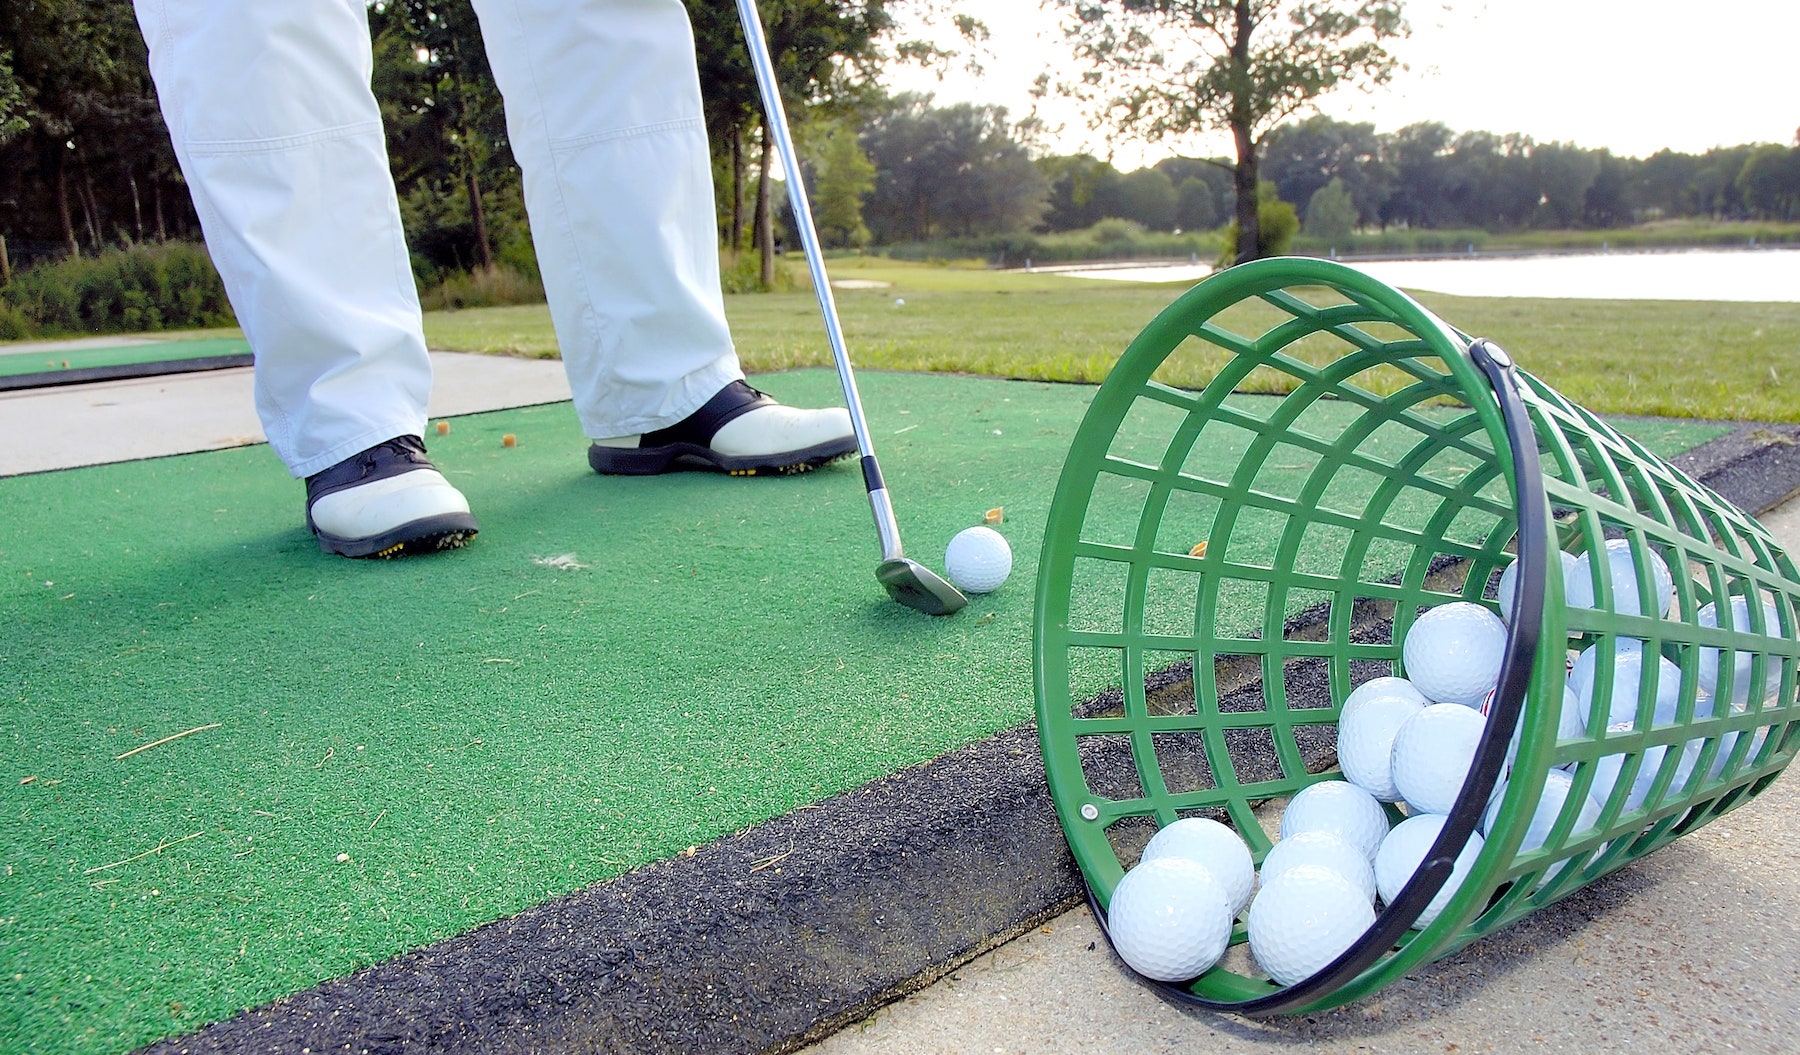 Practice Makes Perfect: A Quick Guide to Driving Range Practice | Golf Management Software